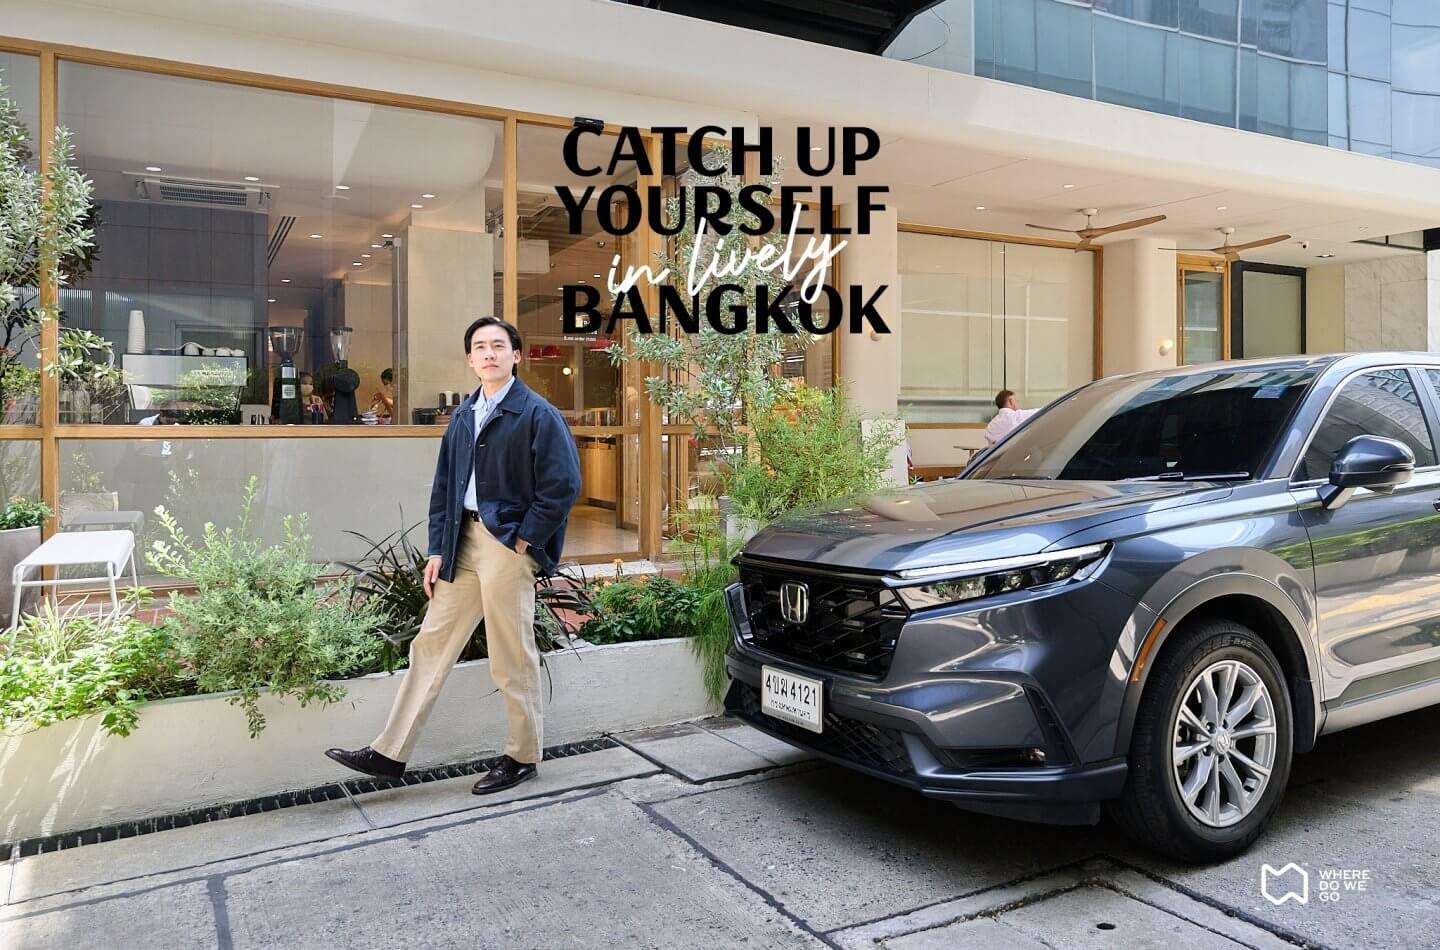 Catch up yourself in lively Bangkok